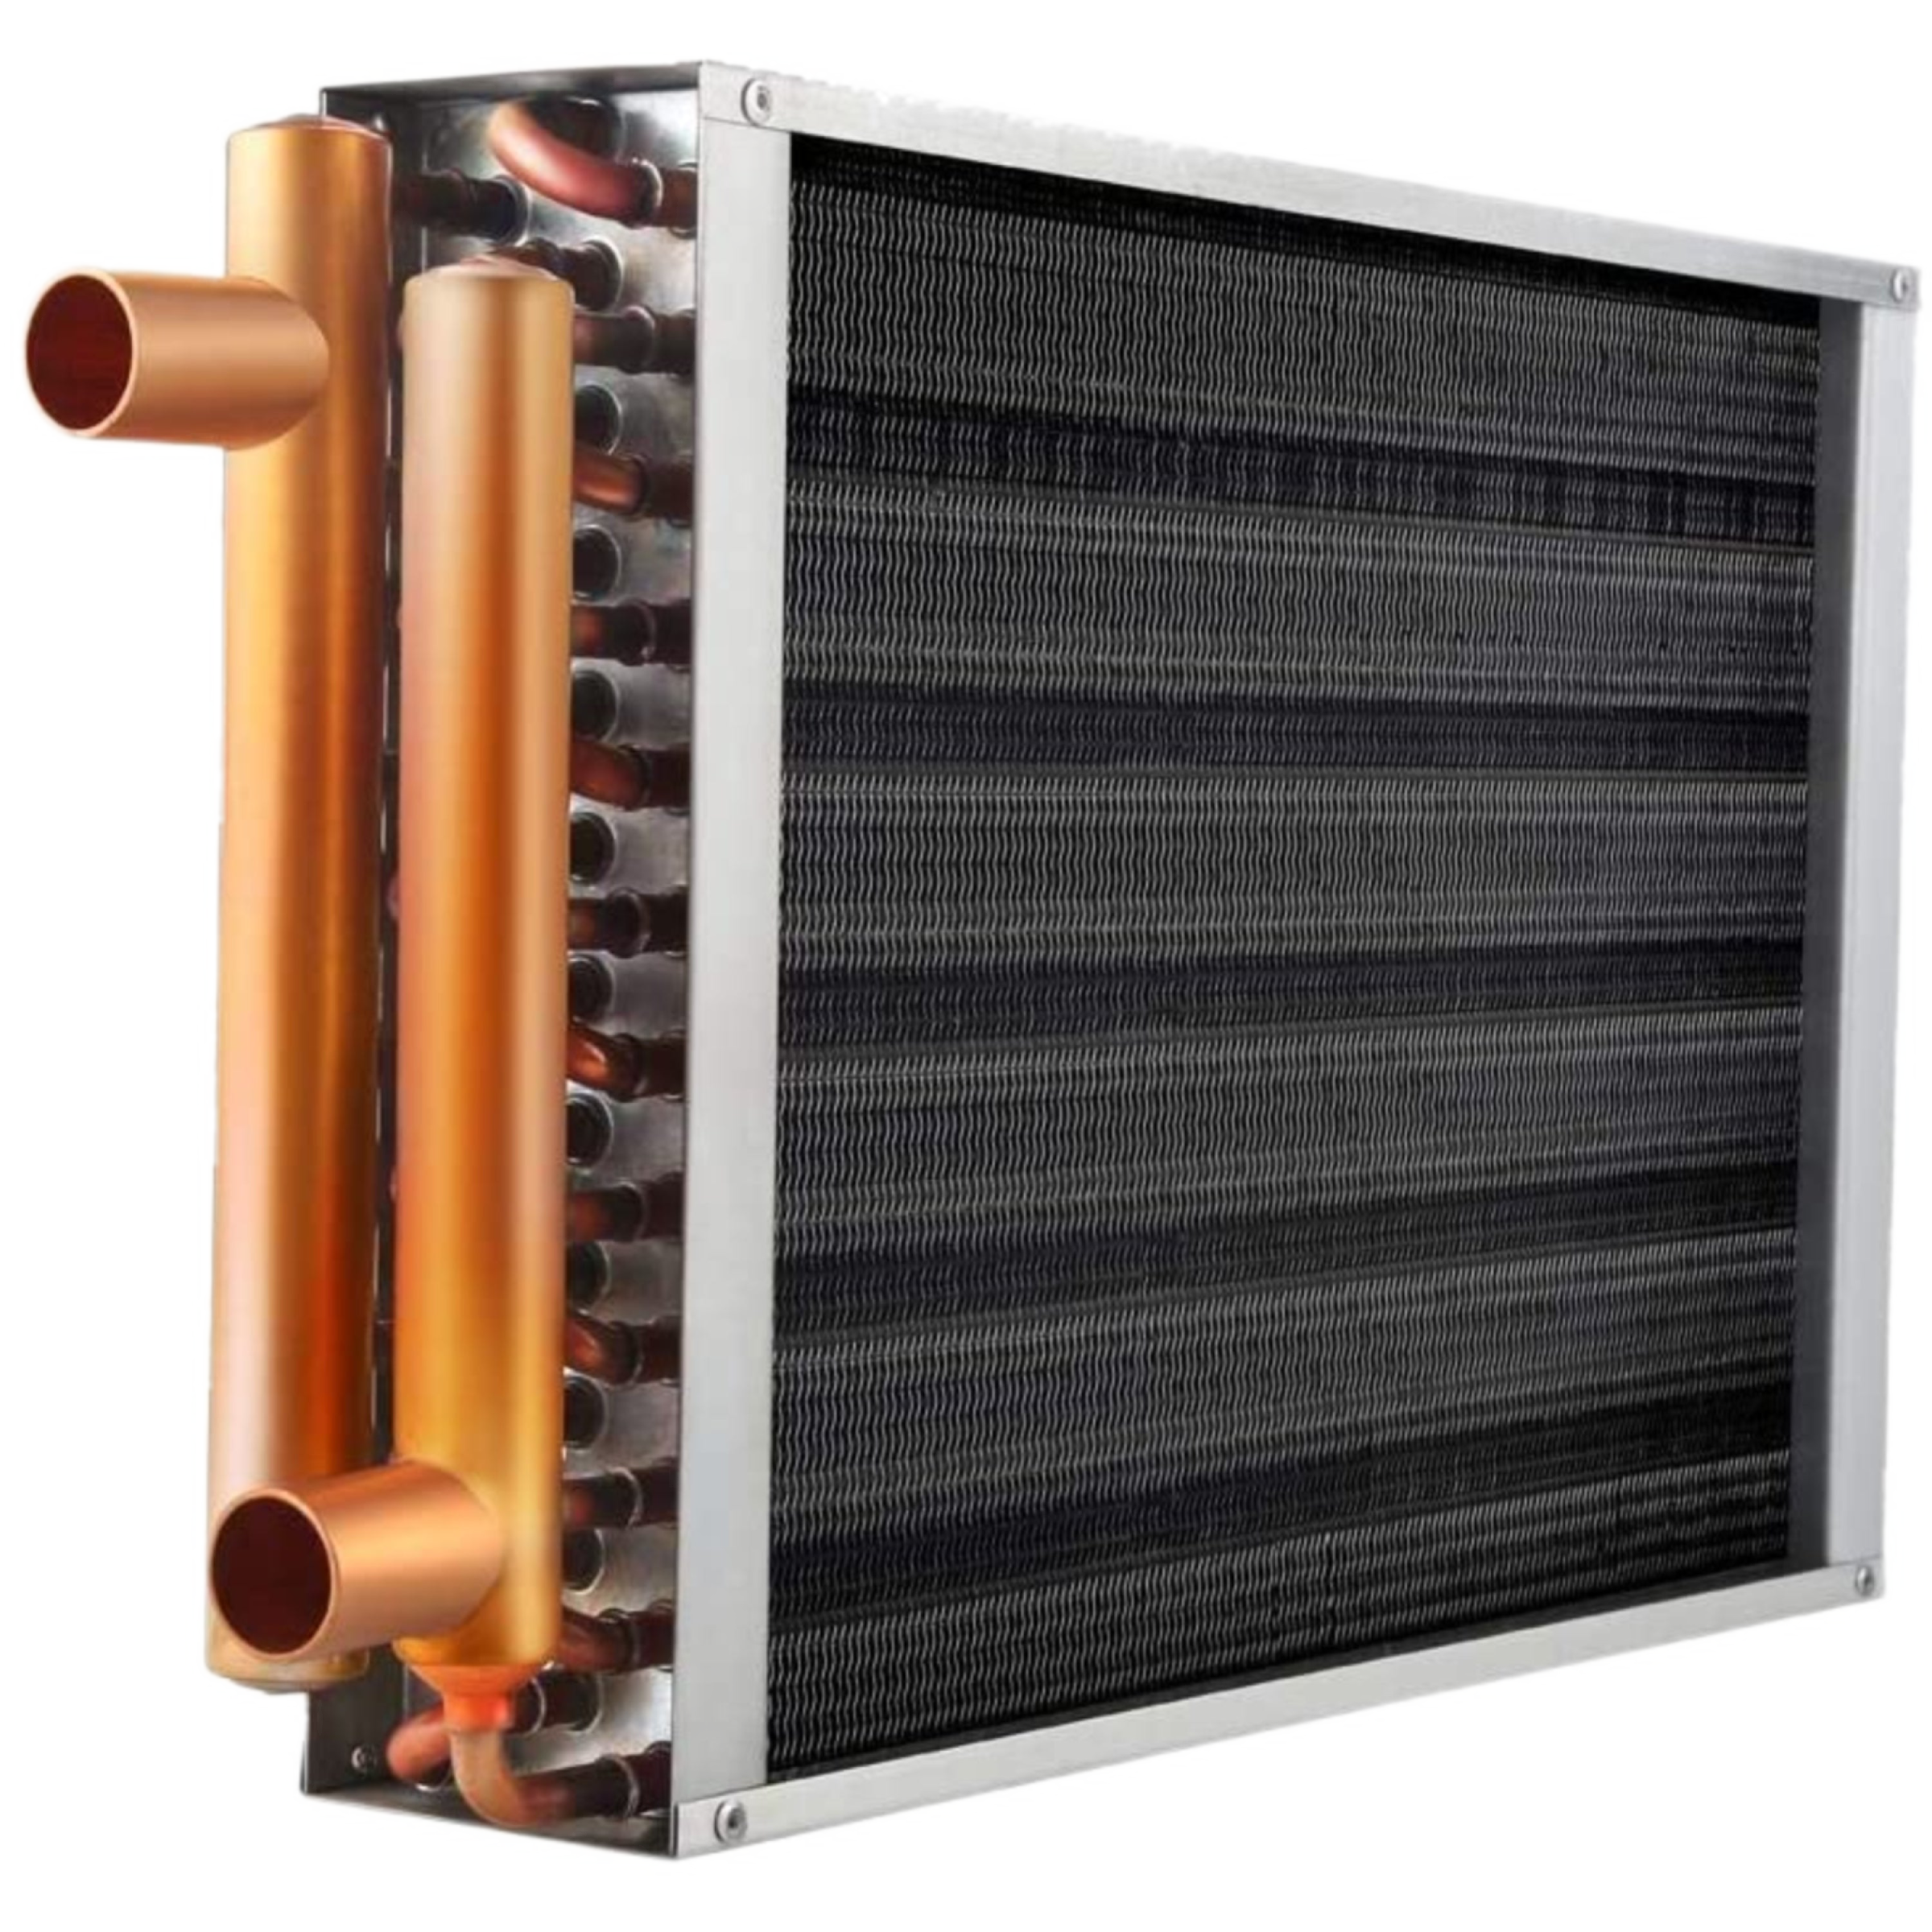 HTL 22 X 22 Hydronic Coil Air to Water Heat Exchanger 20GPM, PD 2.08 PSI, 178200 BTU/h to 200000 BTU/h